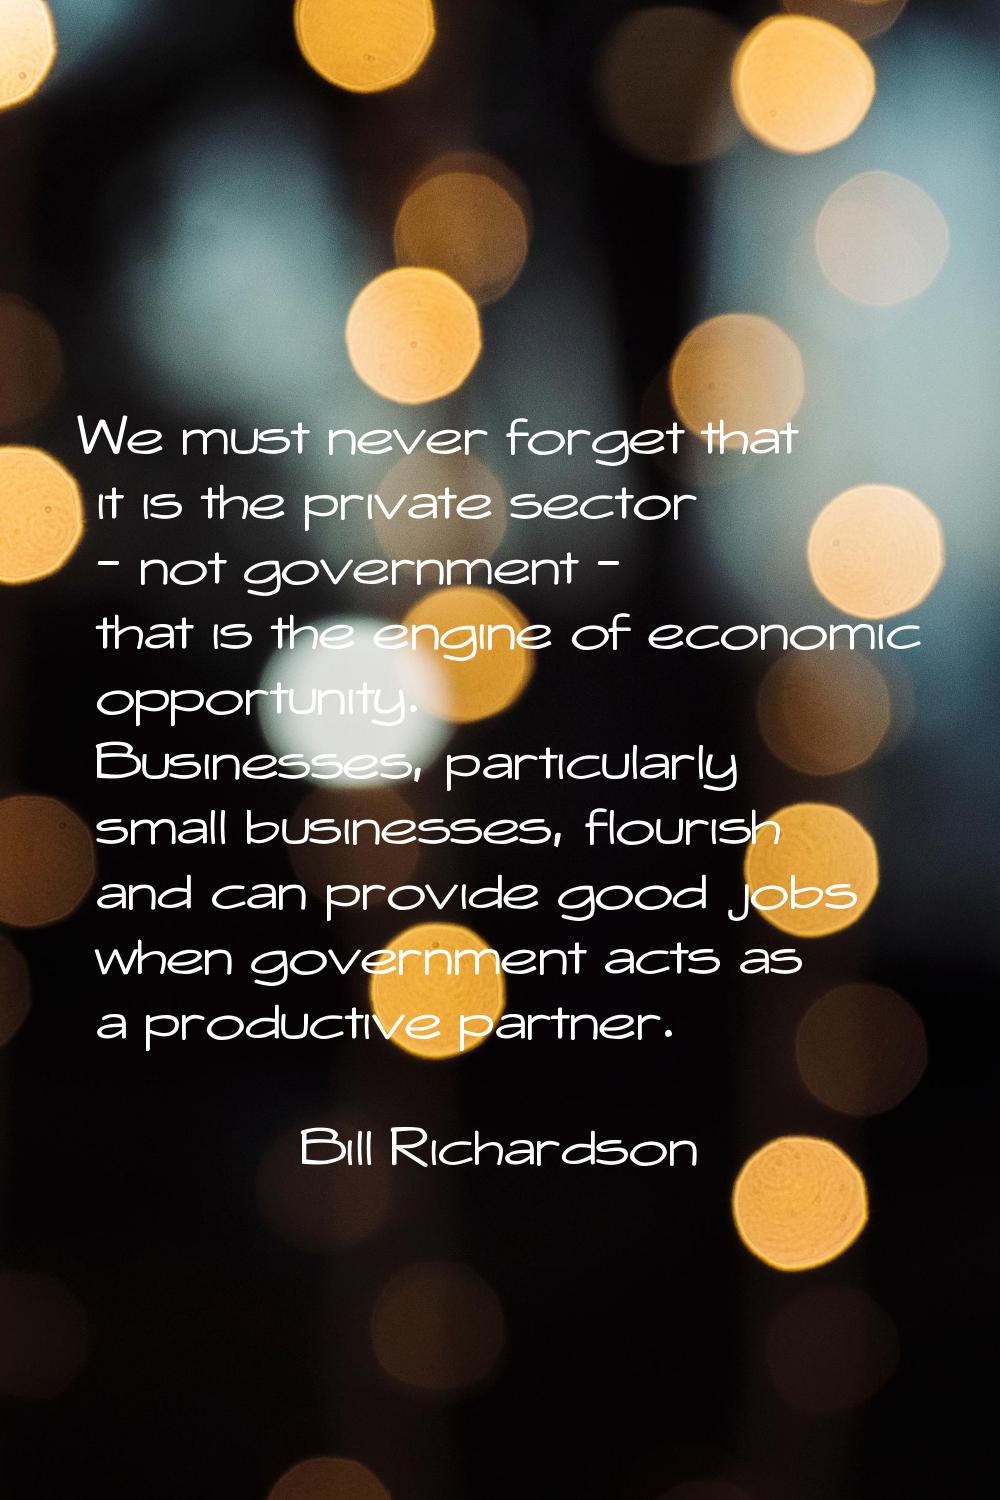 We must never forget that it is the private sector - not government - that is the engine of economi